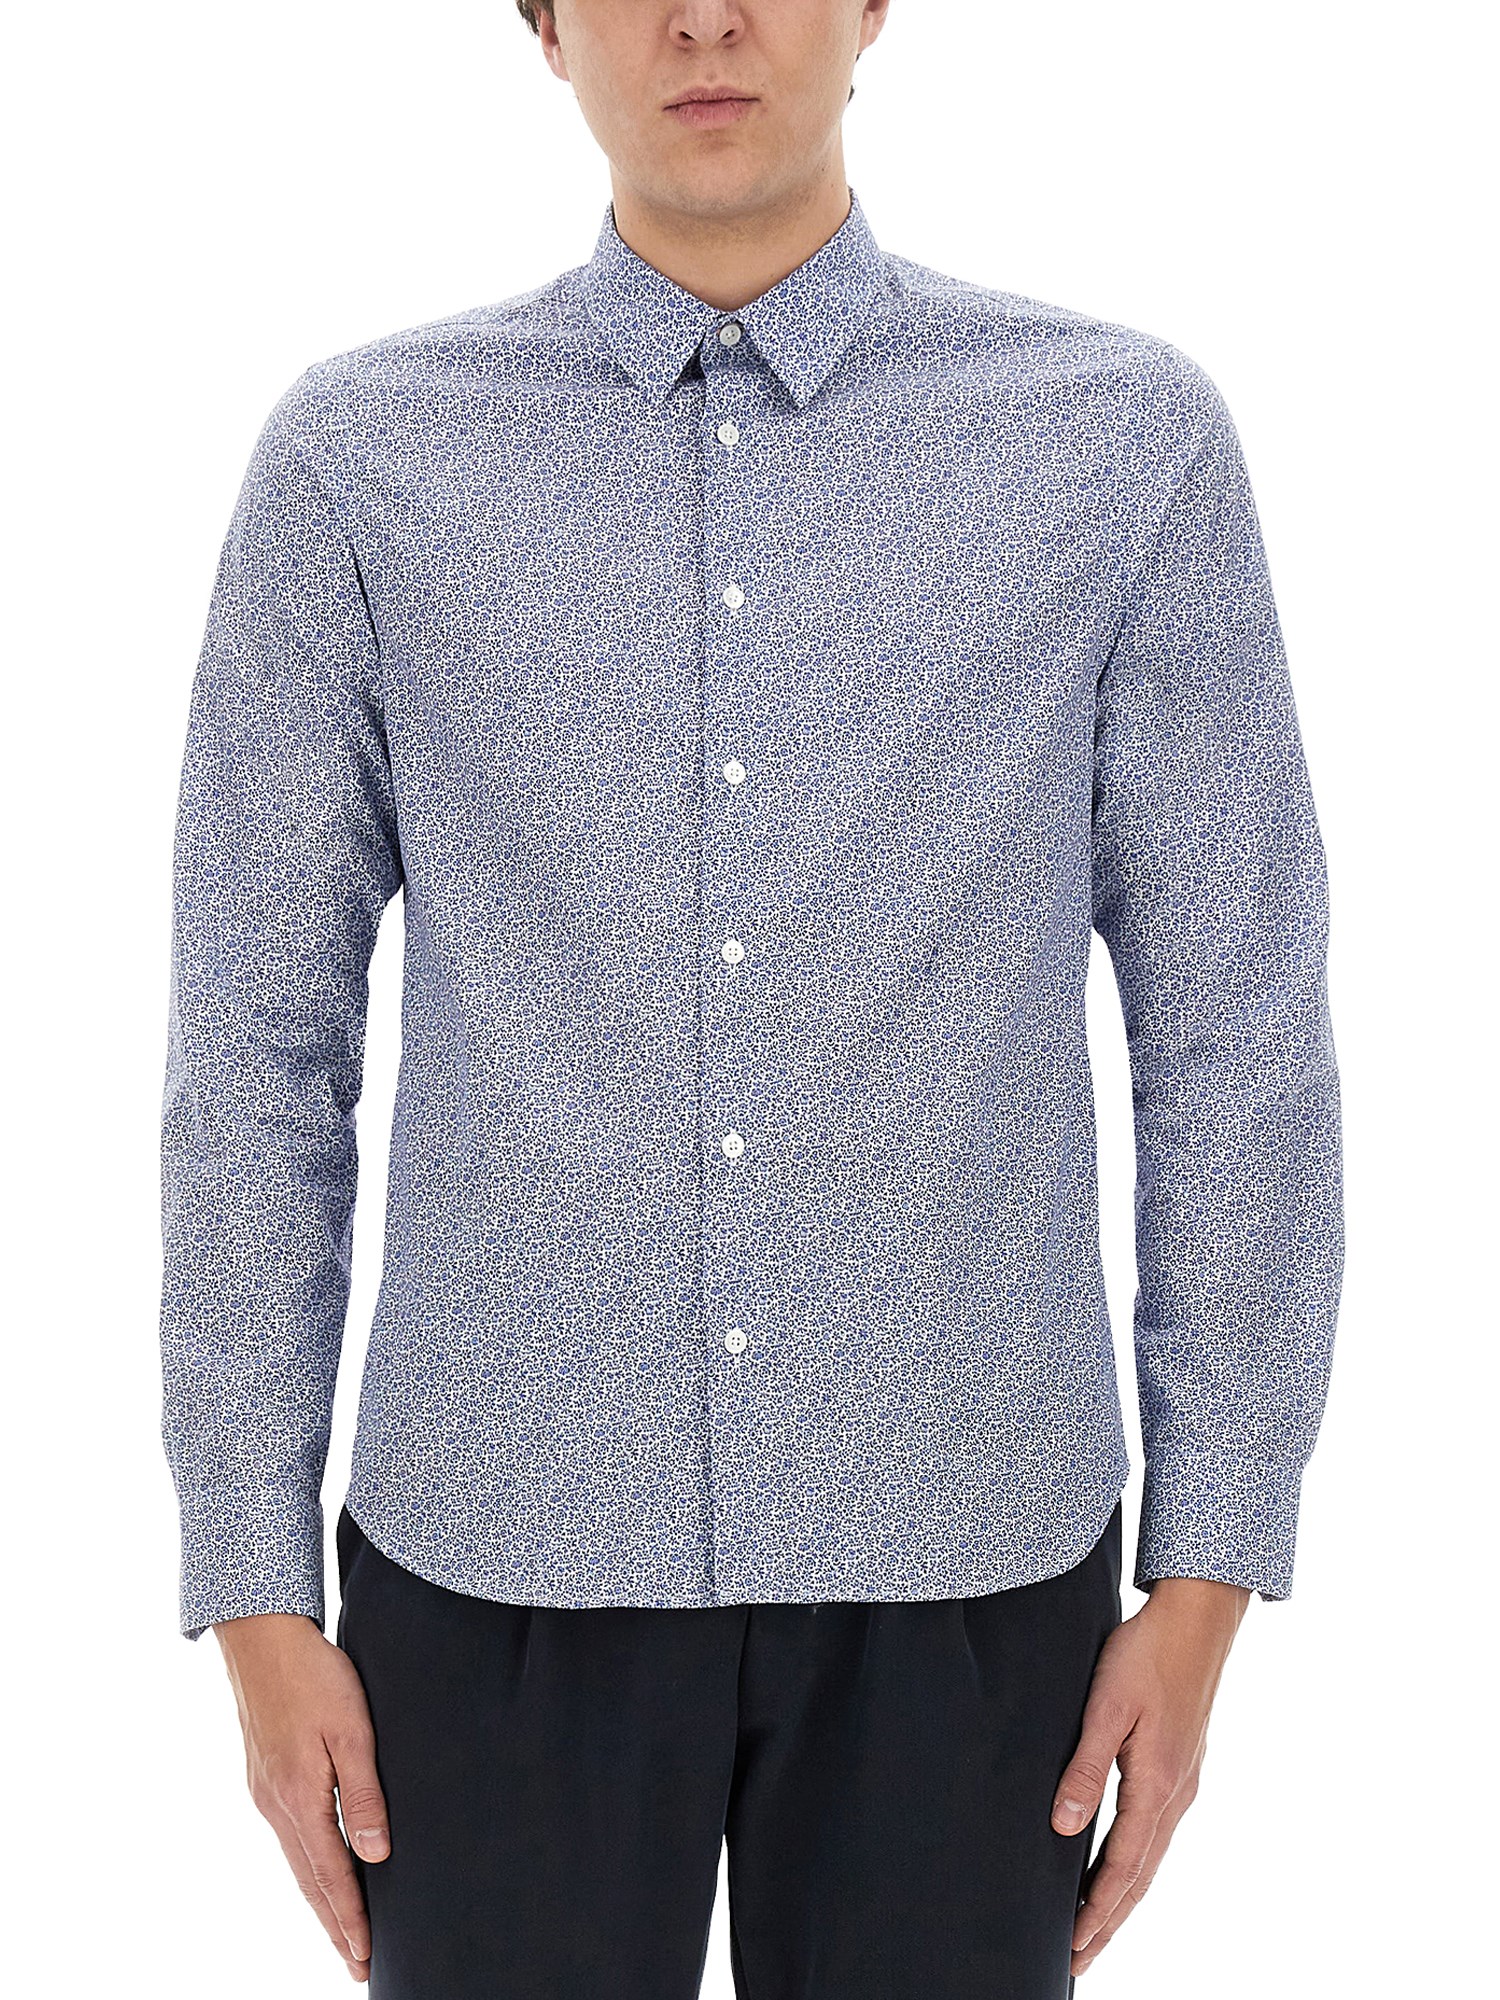 paul smith shirt with floral pattern